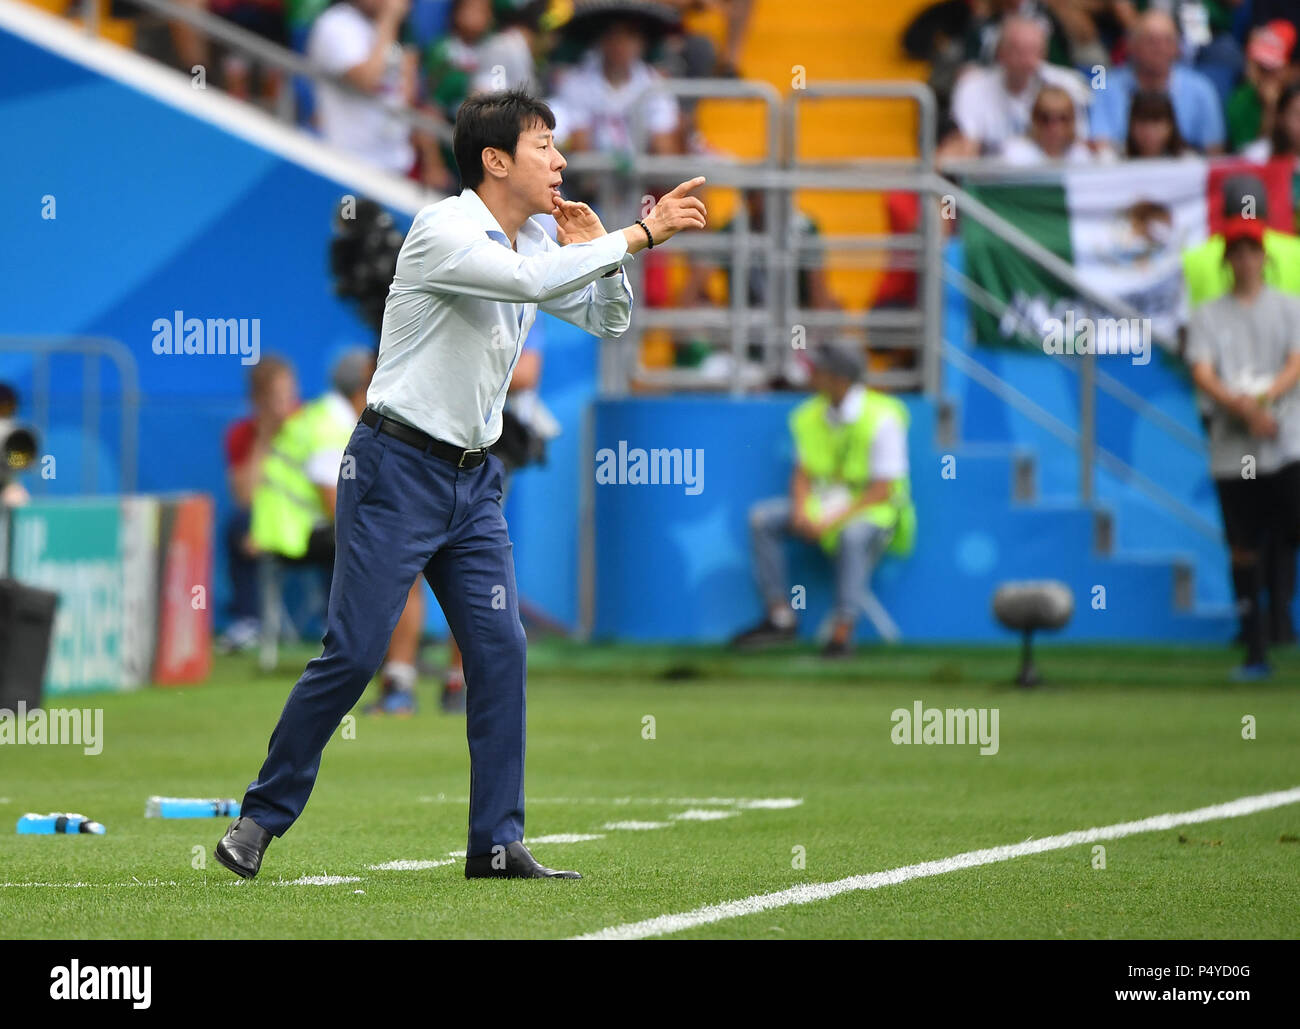 Rostov On Don. 23rd June, 2018. Head coach Shin Tae-yong of South Korea gives instructions to players during the 2018 FIFA World Cup Group F match between South Korea and Mexico in Rostov-on-Don, Russia, June 23, 2018. Credit: Li Ga/Xinhua/Alamy Live News Stock Photo